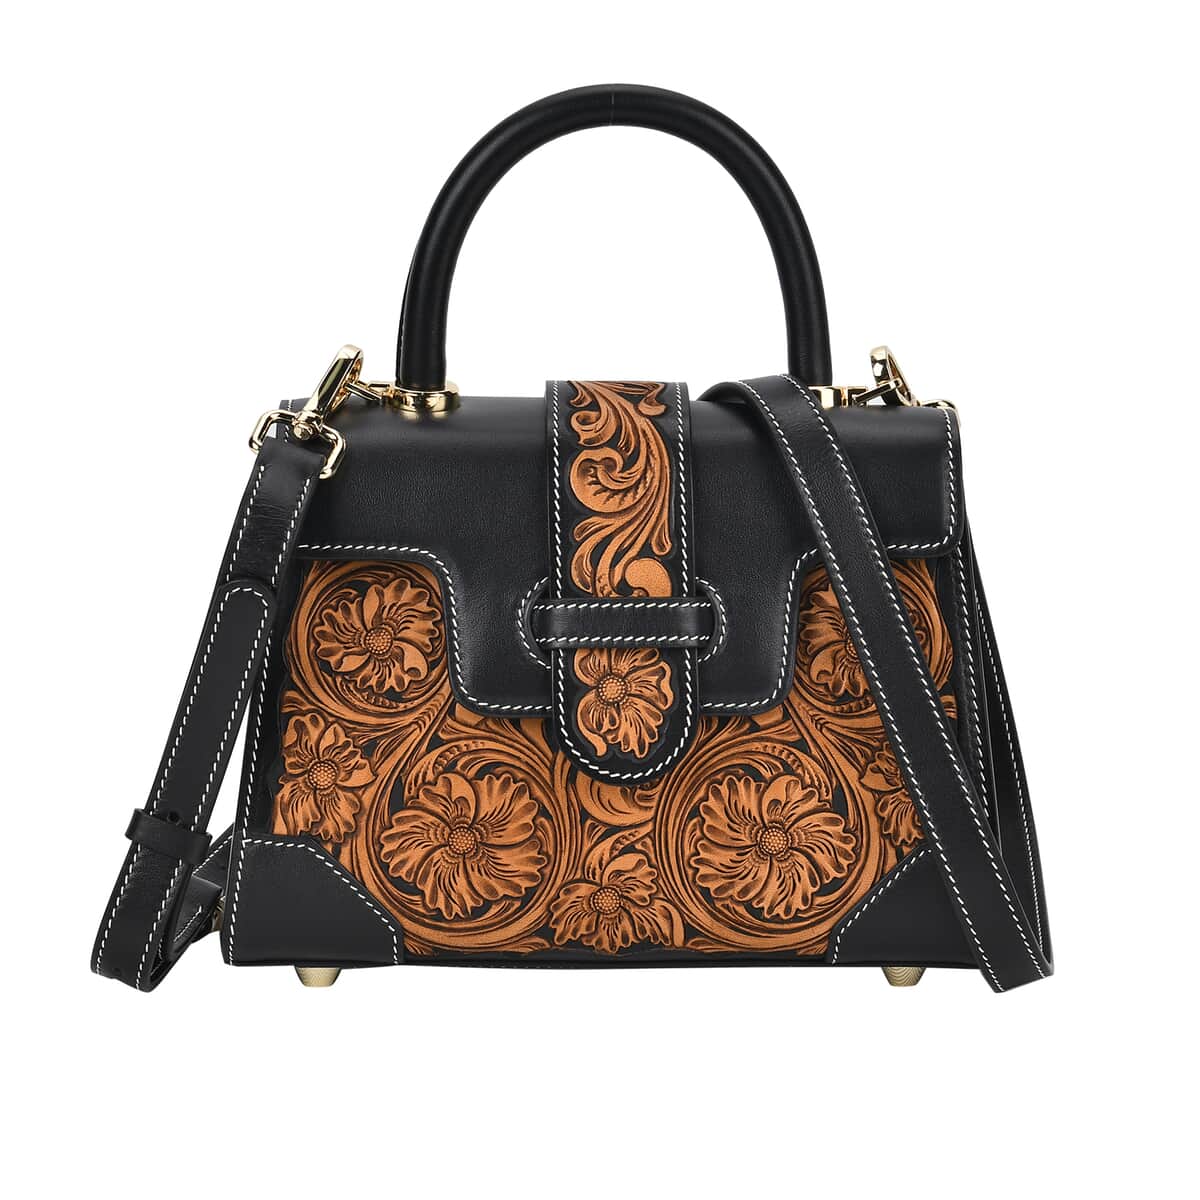 Grand Pelle Black with Solid Color Hand Engraving Flower Pattern Genuine Leather Crossbody Bag (9"x6.5"x3.7") with Handle Drop and Shoulder Strap image number 0